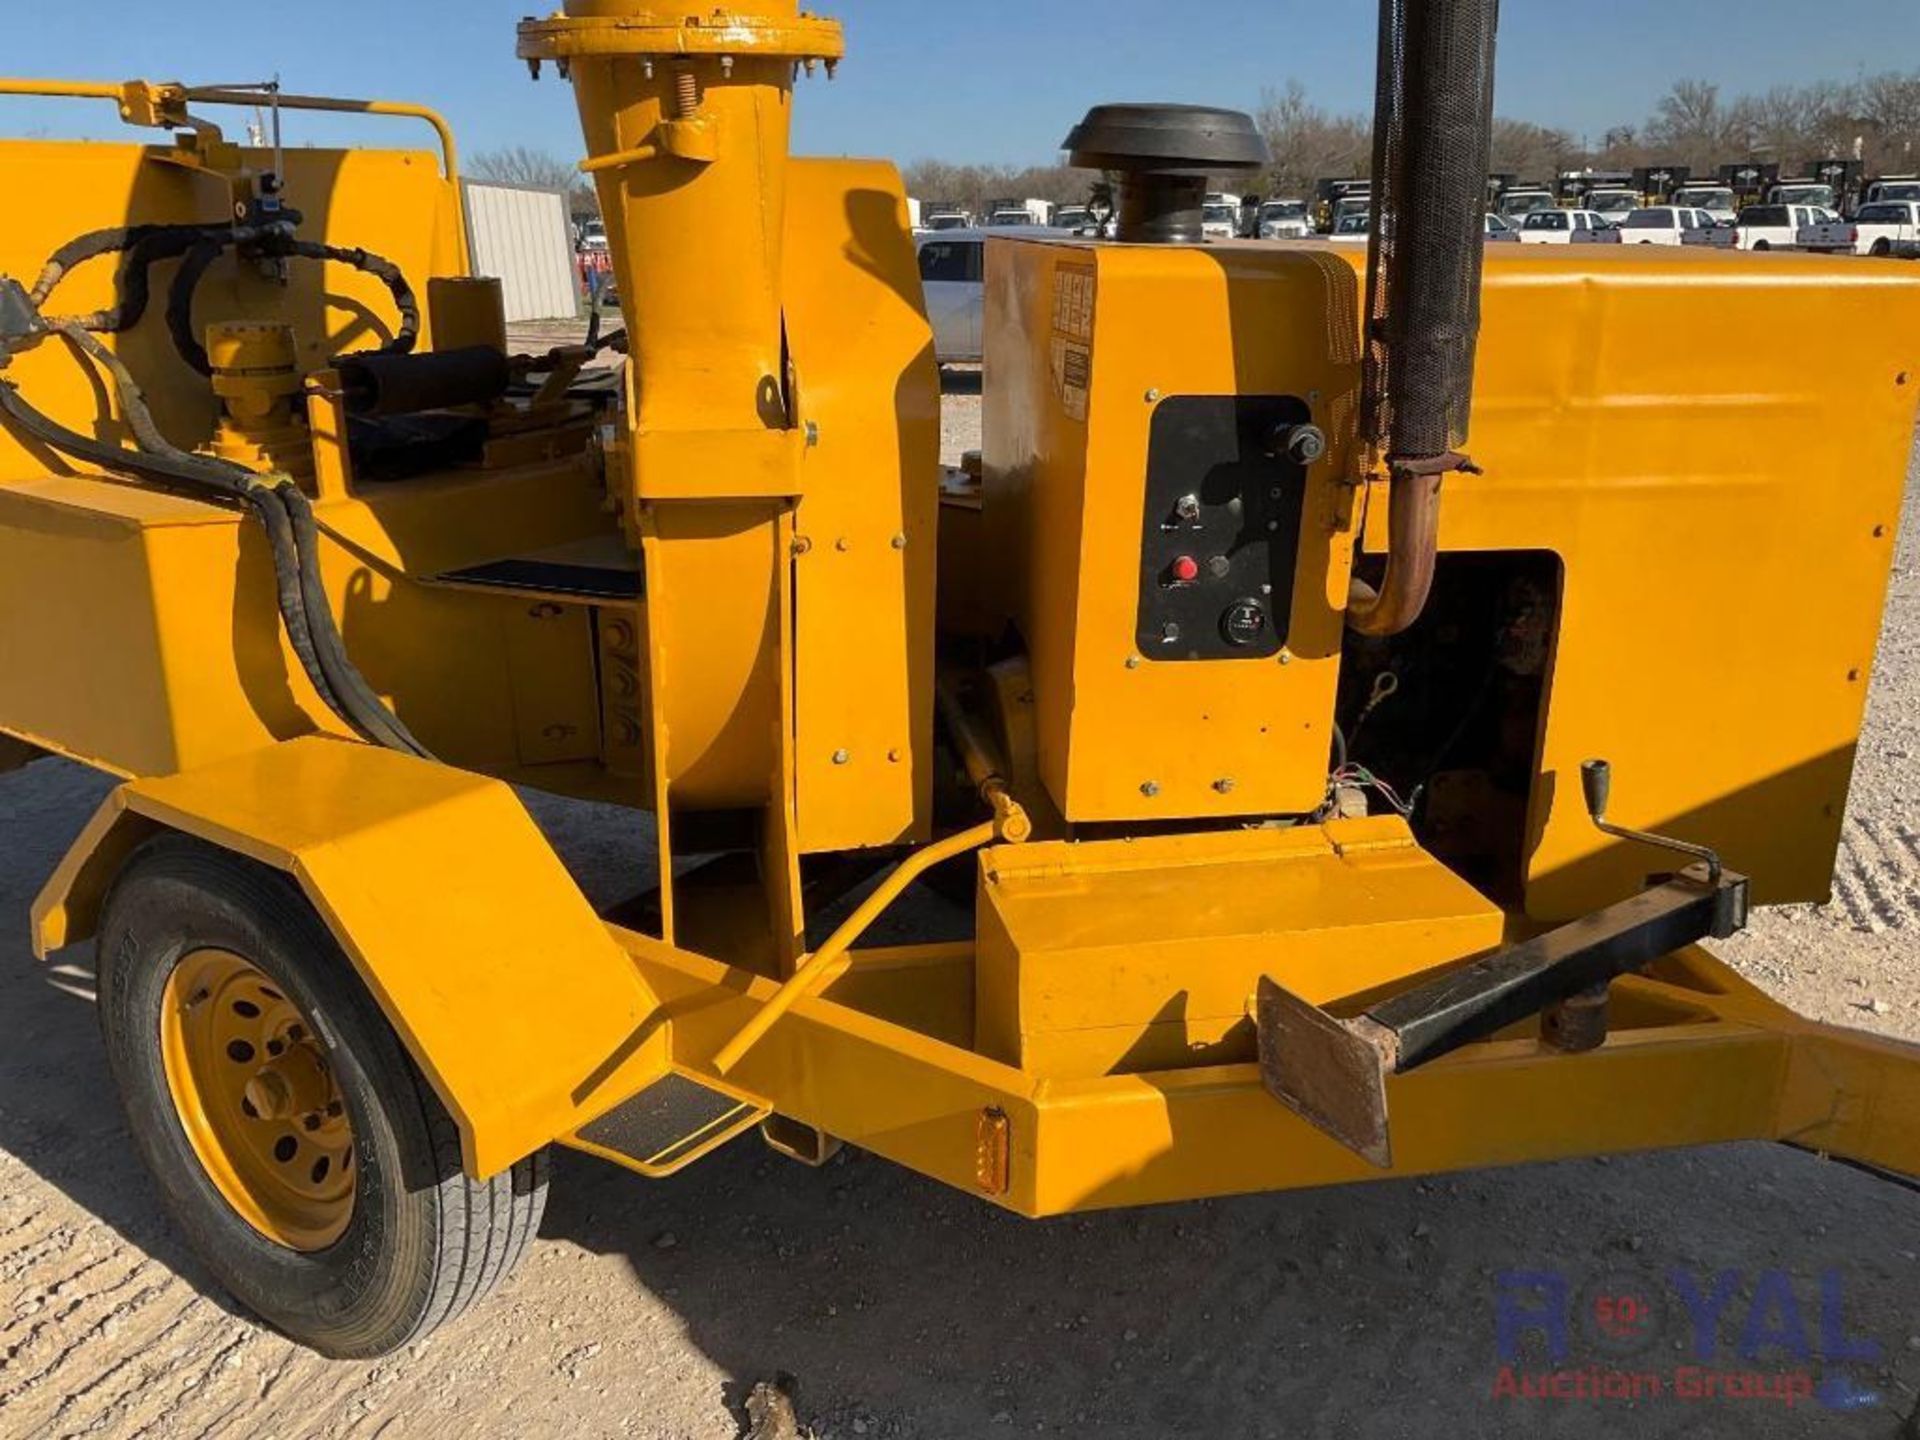 1995 Vermeer BC1230 S/A Towable Wood Chipper - Image 11 of 17